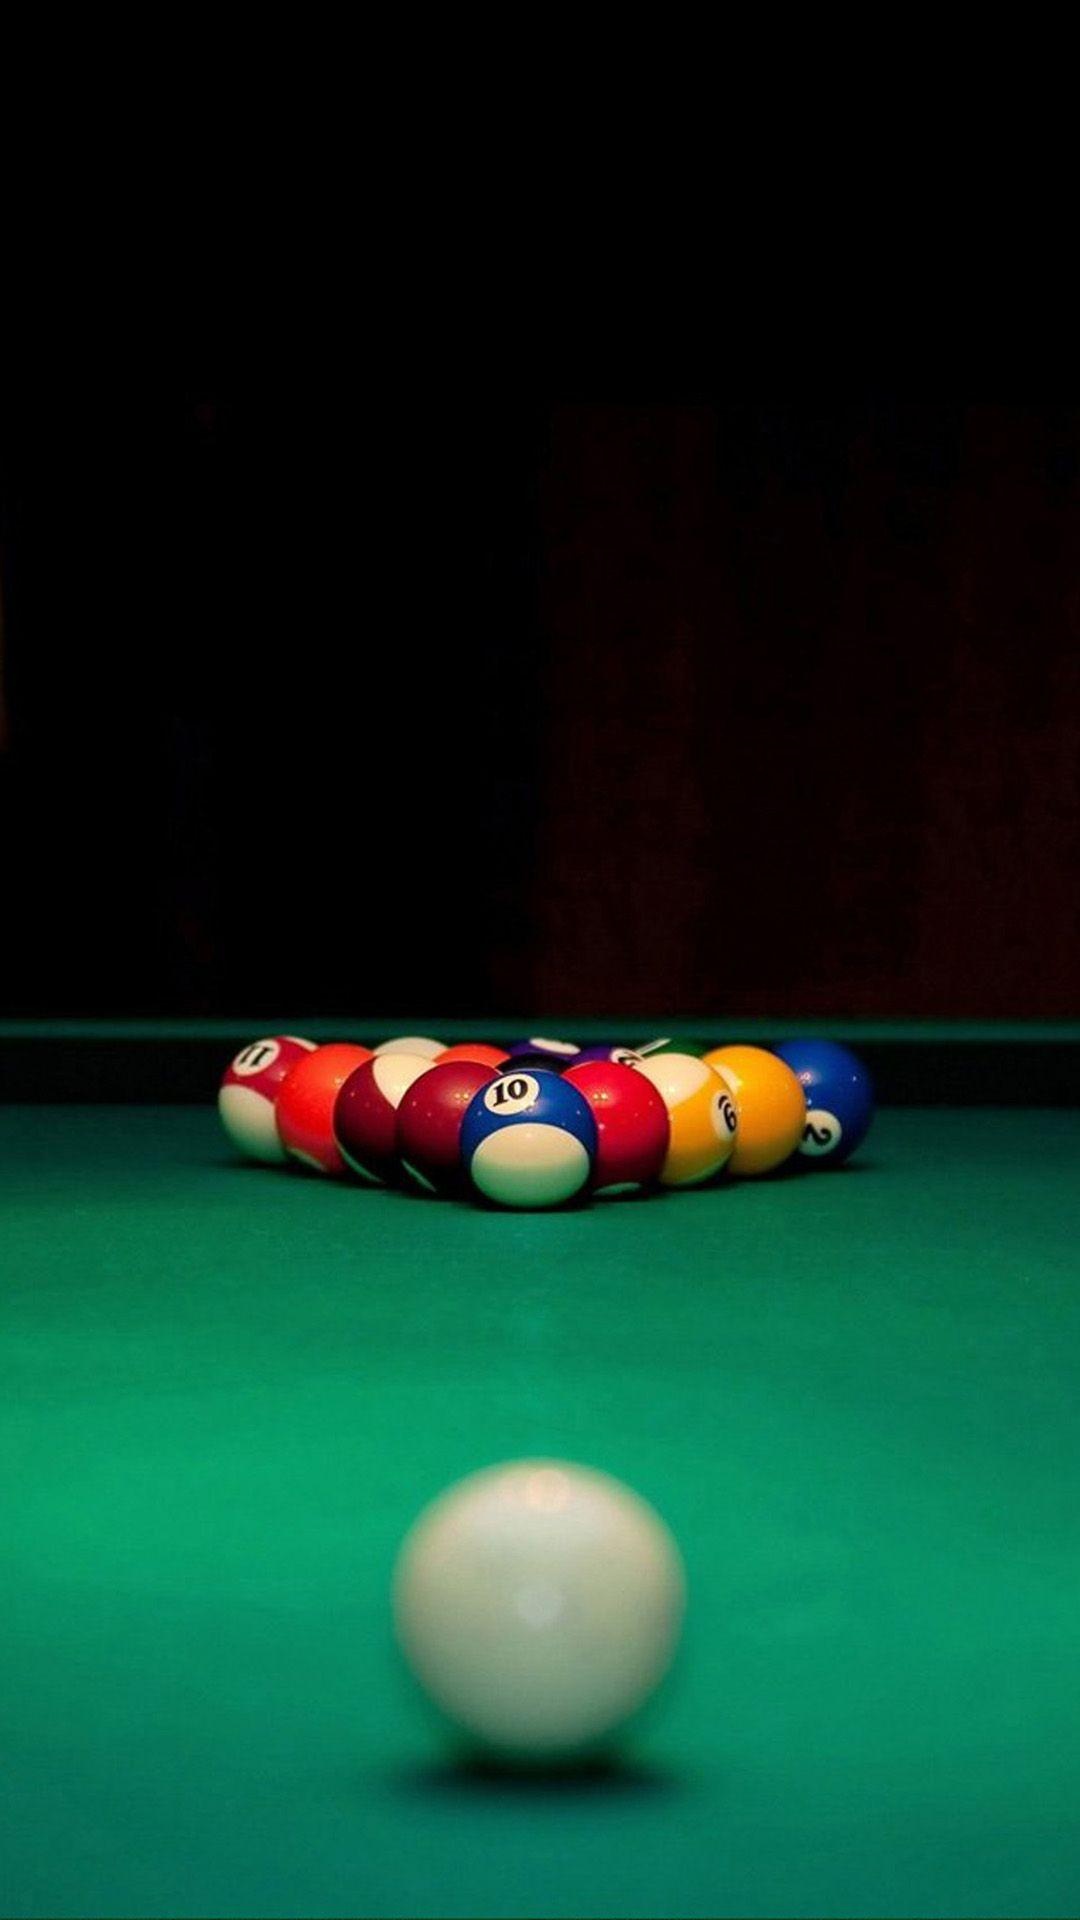 Pool (Cue Sports): A white cue ball before the break shot in a classic eightball type of a recreational sport. 1080x1920 Full HD Wallpaper.